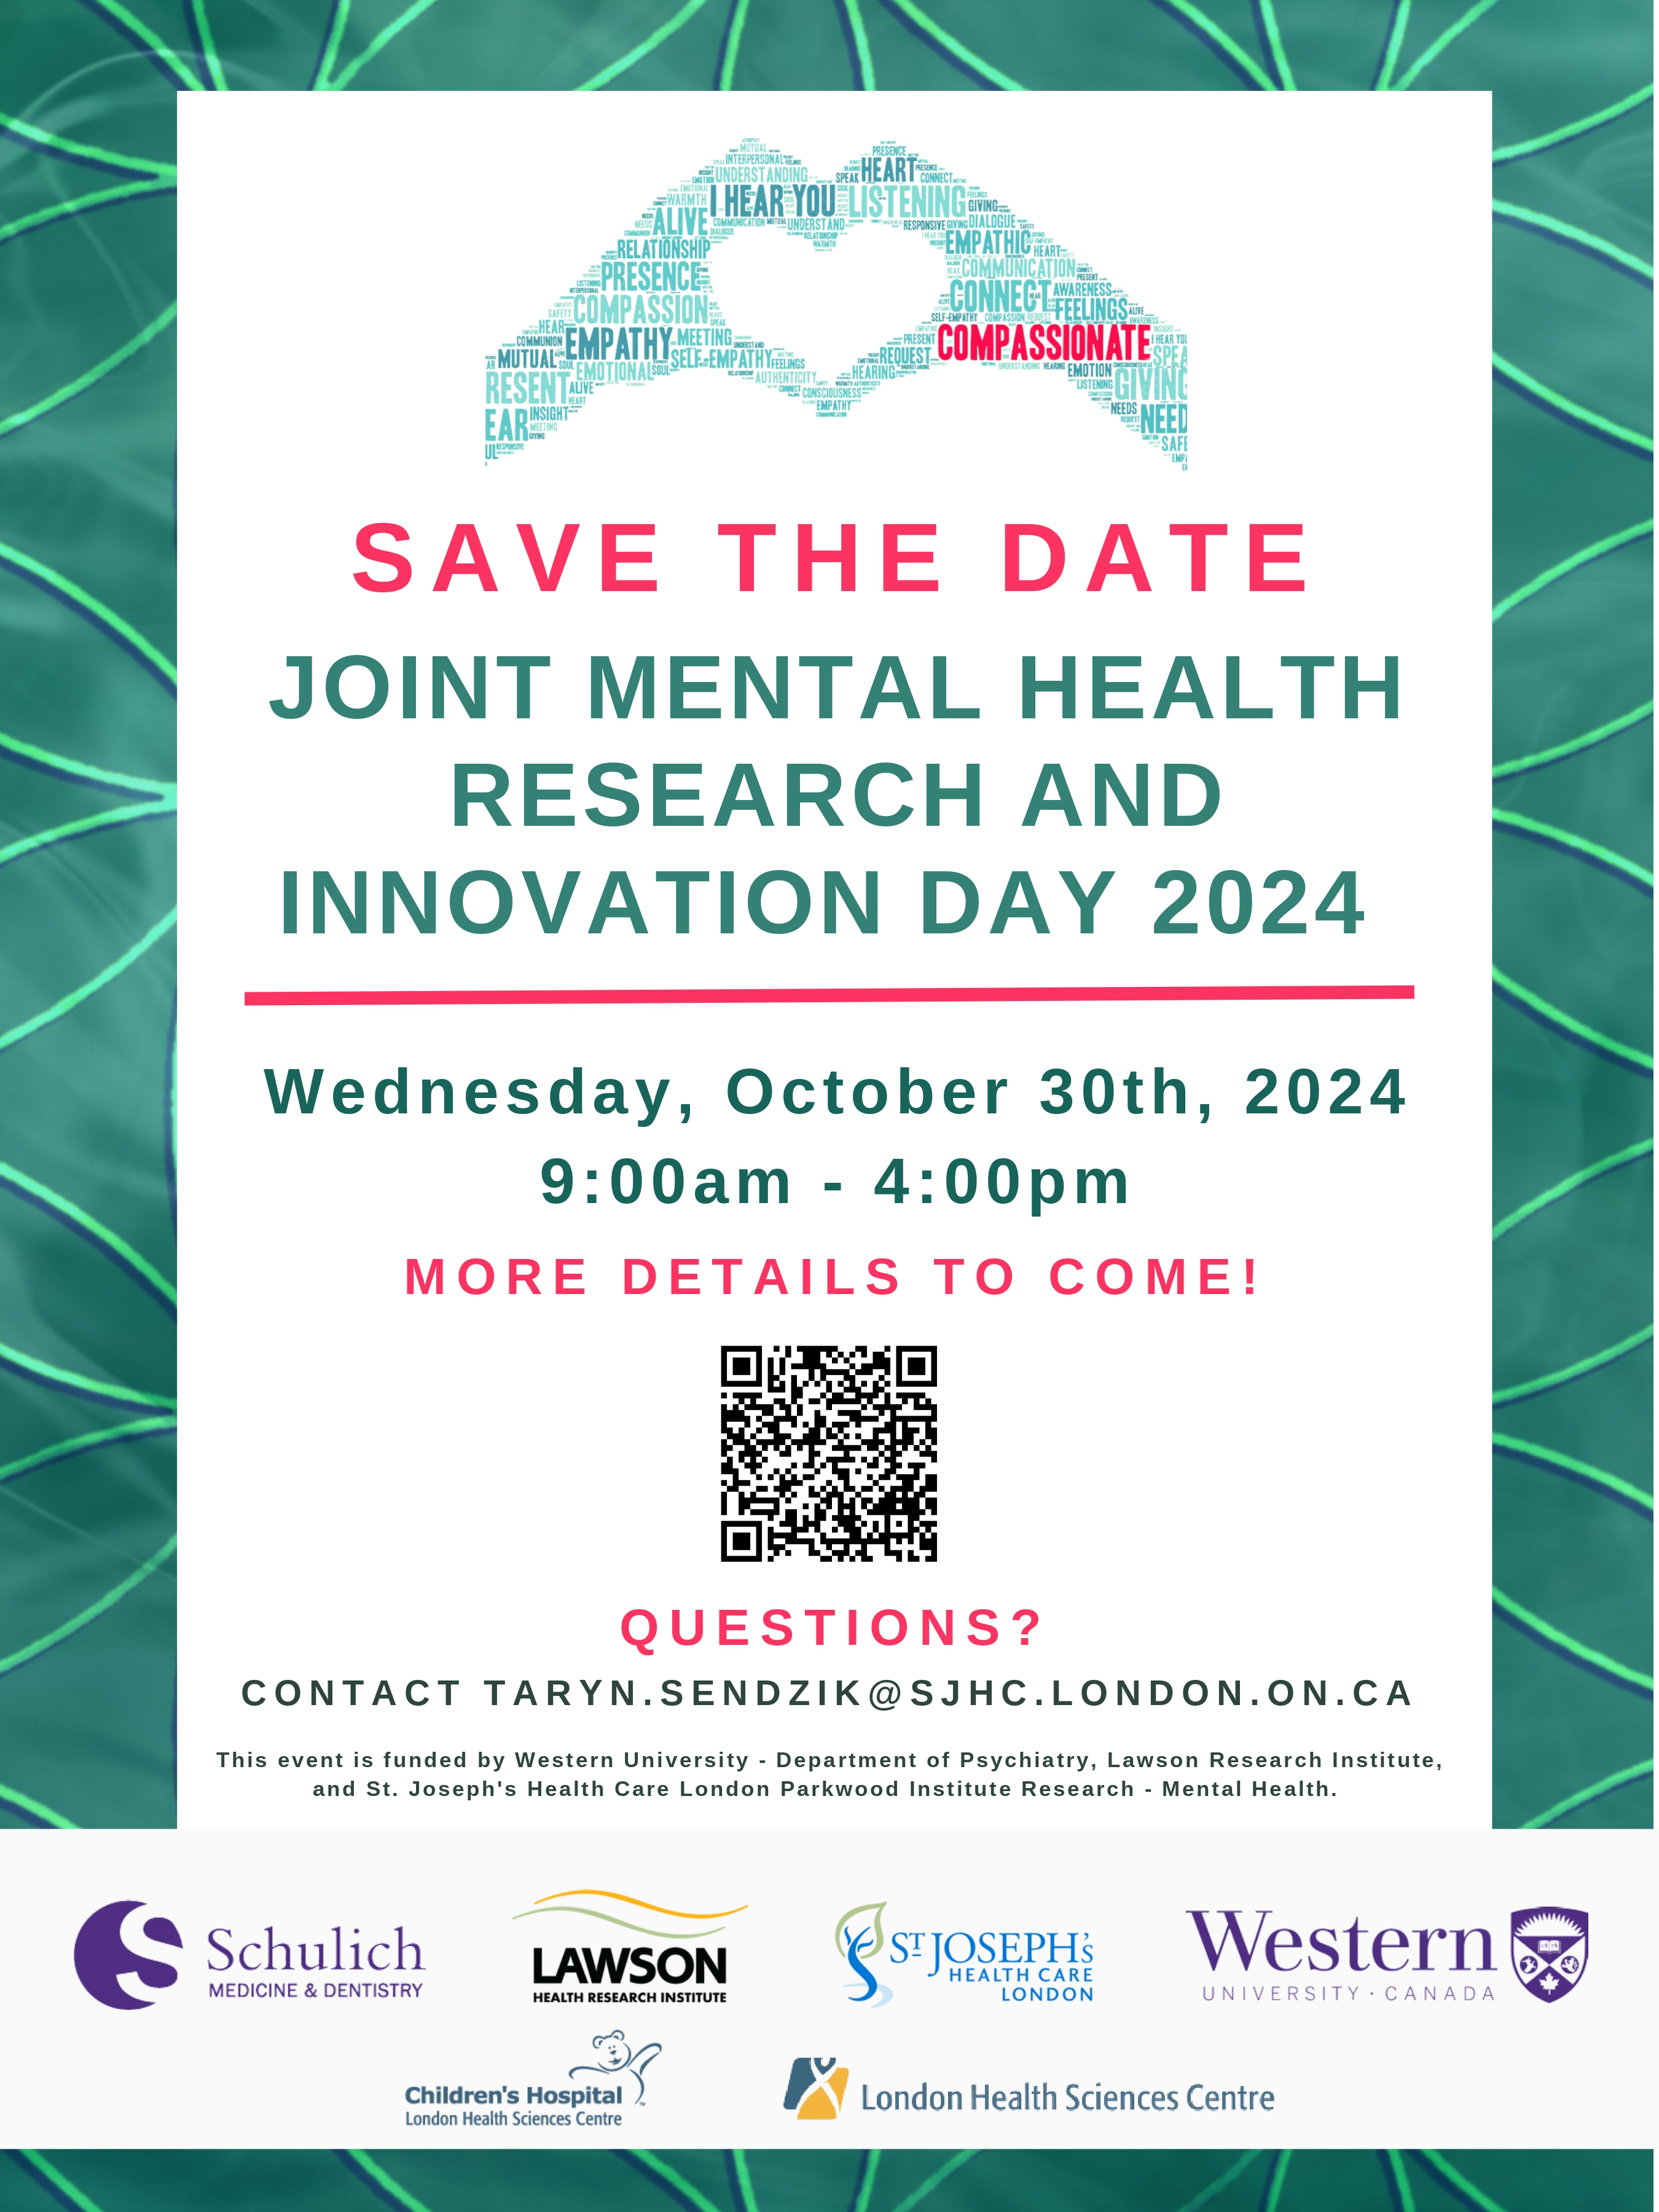 JOINT MENTAL HEALTHRESEARCH ANDINNOVATION DAY 2024 This event is funded by Western University - Department of Psychiatry, Lawson Research Institute, and St. Joseph's Health Care London Parkwood Institute Mental Health. This event is funded by Western University - Department of Psychiatry, Lawson Research Institute, and St. Joseph's Health Care London Parkwood Institute Mental Health. This event is funded by Western University - Department of Psychiatry, Lawson Research Institute, and St. Joseph's Health Care London Parkwood Institute Mental Health. This event is funded by Western University - Department of Psychiatry, Lawson Research Institute, and St. Joseph's Health Care London Parkwood Institute Mental Health. This event is funded by Western University - Department of Psychiatry, Lawson Research Institute, and St. Joseph's Health Care London Parkwood Institute Mental Health. This event is funded by Western University - Department of Psychiatry, Lawson Research Institute, and St. Joseph's Health Care London Parkwood Institute Mental Health. This event is funded by Western University - Department of Psychiatry, Lawson Research Institute, and St. Joseph's Health Care London Parkwood Institute Mental Health. This event is funded by Western University - Department of Psychiatry, Lawson Research Institute, and St. Joseph's Health Care London Parkwood Institute Mental Health. This event is funded by Western University - Department of Psychiatry, Lawson Research Institute, and St. Joseph's Health Care London Parkwood Institute Mental Health. This event is funded by Western University - Department of Psychiatry, Lawson Research Institute, and St. Joseph's Health Care London Parkwood Institute Mental Health. This event is funded by Western University - Department of Psychiatry, Lawson Research Institute, and St. Joseph's Health Care London Parkwood Institute Mental Health. This event is funded by Western University - Department of Psychiatry, Lawson Research Institute, and St. Joseph's Health Care London Parkwood Institute Mental Health. This event is funded by Western University - Department of Psychiatry, Lawson Research Institute, and St. Joseph's Health Care London Parkwood Institute Mental Health. This event is funded by Western University - Department of Psychiatry, Lawson Research Institute, and St. Joseph's Health Care London Parkwood Institute Mental Health. This event is funded by Western University - Department of Psychiatry, Lawson Research Institute, and St. Joseph's Health Care London Parkwood Institute Mental Health. This event is funded by Western University - Department of Psychiatry, Lawson Research Institute, and St. Joseph's Health Care London Parkwood Institute Mental Health. This event is funded by Western University - Department of Psychiatry, Lawson Research Institute, and St. Joseph's Health Care London Parkwood Institute Mental Health. This event is funded by Western University - Department of Psychiatry, Lawson Research Institute, and St. Joseph's Health Care London Parkwood Institute Mental Health. This event is funded by Western University - Department of Psychiatry, Lawson Research Institute, and St. Joseph's Health Care London Parkwood Institute Mental Health. This event is funded by Western University - Department of Psychiatry, Lawson Research Institute, and St. Joseph's Health Care London Parkwood Institute Mental Health. This event is funded by Western University - Department of Psychiatry, Lawson Research Institute, and St. Joseph's Health Care London Parkwood Institute Mental Health. This event is funded by Western University - Department of Psychiatry, Lawson Research Institute, and St. Joseph's Health Care London Parkwood Institute Mental Health. This event is funded by Western University - Department of Psychiatry, Lawson Research Institute, and St. Joseph's Health Care London Parkwood Institute Mental Health. This event is funded by Western University - Department of Psychiatry, Lawson Research Institute, and St. Joseph's Health Care London Parkwood Institute Mental Health. This event is funded by Western University - Department of Psychiatry, Lawson Research Institute, and St. Joseph's Health Care London Parkwood Institute Mental Health. This event is funded by Western University - Department of Psychiatry, Lawson Research Institute, and St. Joseph's Health Care London Parkwood Institute Mental Health. This event is funded by Western University - Department of Psychiatry, Lawson Research Institute, and St. Joseph's Health Care London Parkwood Institute Mental Health. This event is funded by Western University - Department of Psychiatry, Lawson Research Institute, and St. Joseph's Health Care London Parkwood Institute Mental Health. This event is funded by Western University - Department of Psychiatry, Lawson Research Institute, and St. Joseph's Health Care London Parkwood Institute Mental Health. This event is funded by Western University - Department of Psychiatry, Lawson Research Institute, and St. Joseph's Health Care London Parkwood Institute Mental Health. This event is funded by Western University - Department of Psychiatry, Lawson Research Institute, and St. Joseph's Health Care London Parkwood Institute Mental Health. This event is funded by Western University - Department of Psychiatry, Lawson Research Institute, and St. Joseph's Health Care London Parkwood Institute Mental Health. This event is funded by Western University - Department of Psychiatry, Lawson Research Institute, and St. Joseph's Health Care London Parkwood Institute Mental Health. This event is funded by Western University - Department of Psychiatry, Lawson Research Institute, and St. Joseph's Health Care London Parkwood Institute Mental Health. This event is funded by Western University - Department of Psychiatry, Lawson Research Institute, and St. Joseph's Health Care London Parkwood Institute Mental Health. This event is funded by Western University - Department of Psychiatry, Lawson Research Institute, and St. Joseph's Health Care London Parkwood Institute Mental Health. This event is funded by Western University - Department of Psychiatry, Lawson Research Institute, and St. Joseph's Health Care London Parkwood Institute Mental Health. This event is funded by Western University - Department of Psychiatry, Lawson Research Institute, and St. Joseph's Health Care London Parkwood Institute Mental Health. This event is funded by Western University - Department of Psychiatry, Lawson Research Institute, and St. Joseph's Health Care London Parkwood Institute Mental Health. This event is funded by Western University - Department of Psychiatry, Lawson Research Institute, and St. Joseph's Health Care London Parkwood Institute Mental Health. SAVE THE DATEThis event is funded by Western University - Department of Psychiatry, Lawson Research Institute,and St. Joseph's Health Care London Parkwood Institute Research - Mental Health. MORE DETAILS TO COME! Wednesday, October 30th, 20249:00am - 4:00pmQUESTIONS?